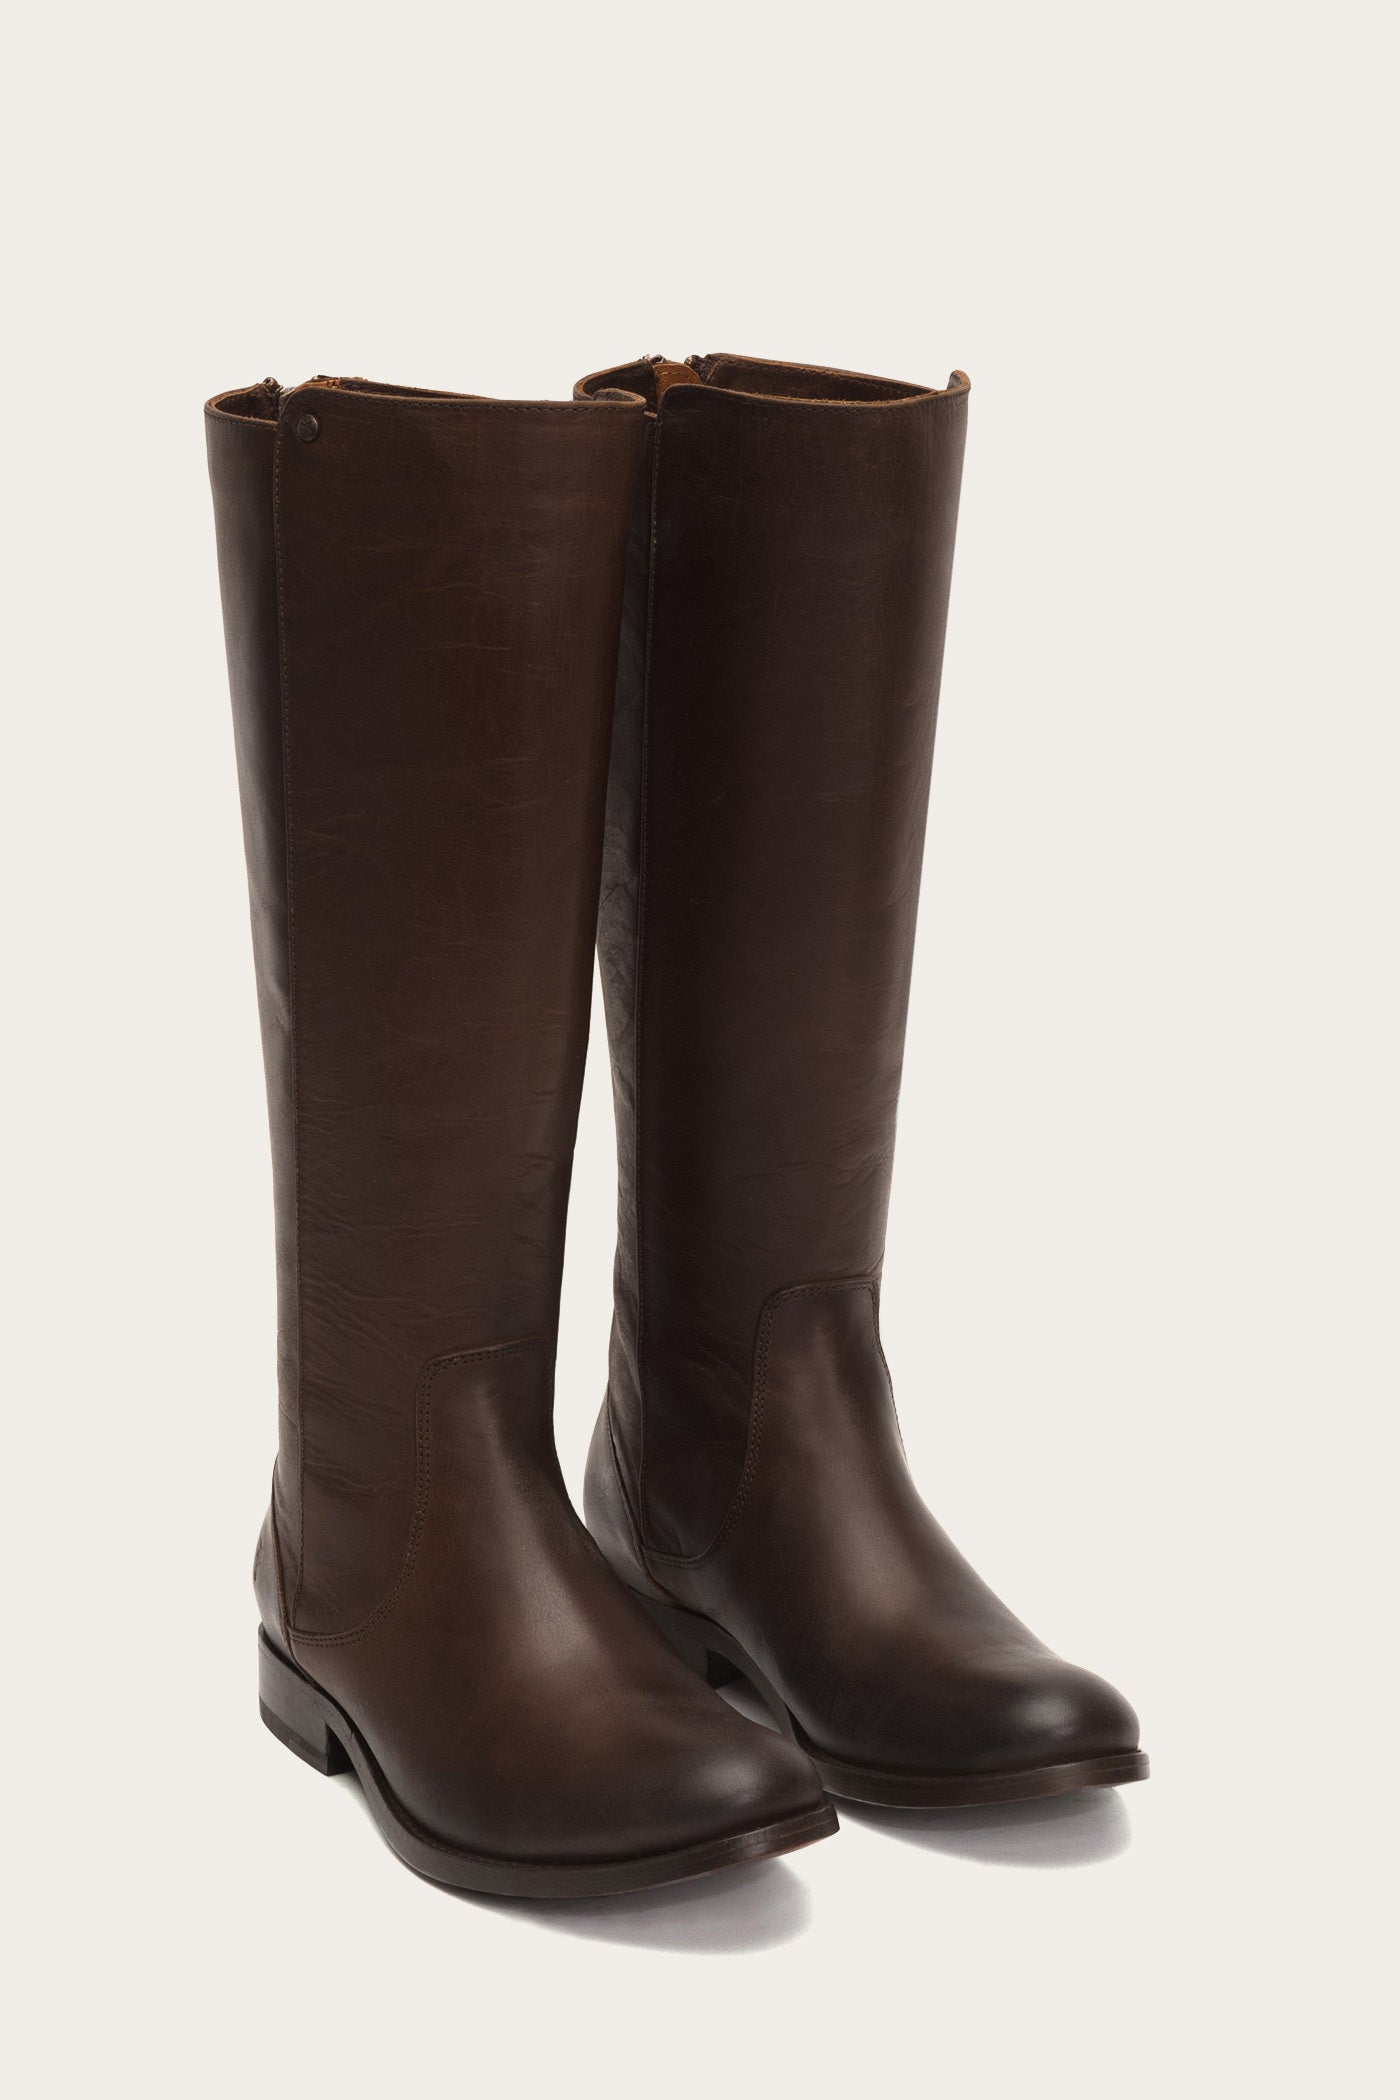 frye extra wide calf boots